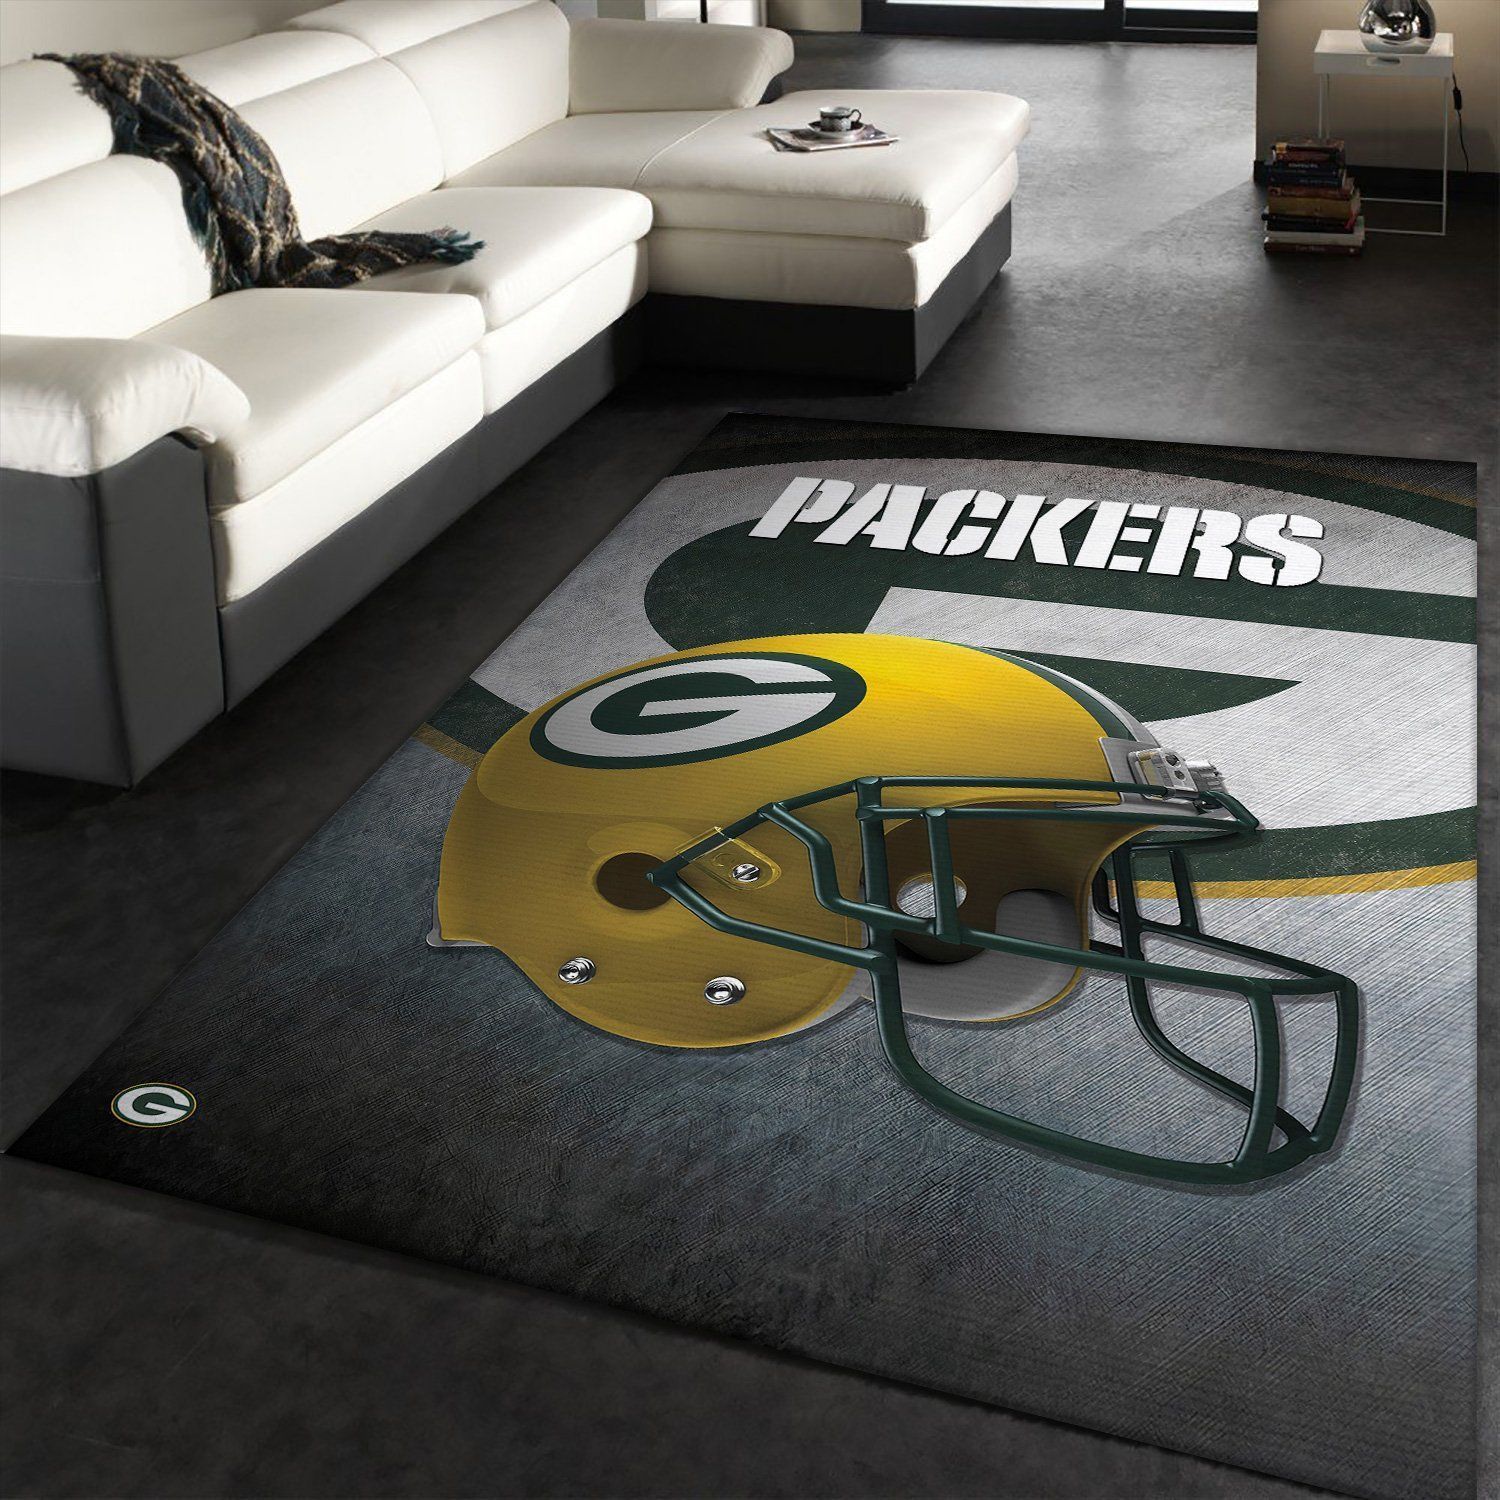 Green Bay Packers Nfl Team Home Decor Area Rug Rugs For Living Room Rug Home Decor - Indoor Outdoor Rugs